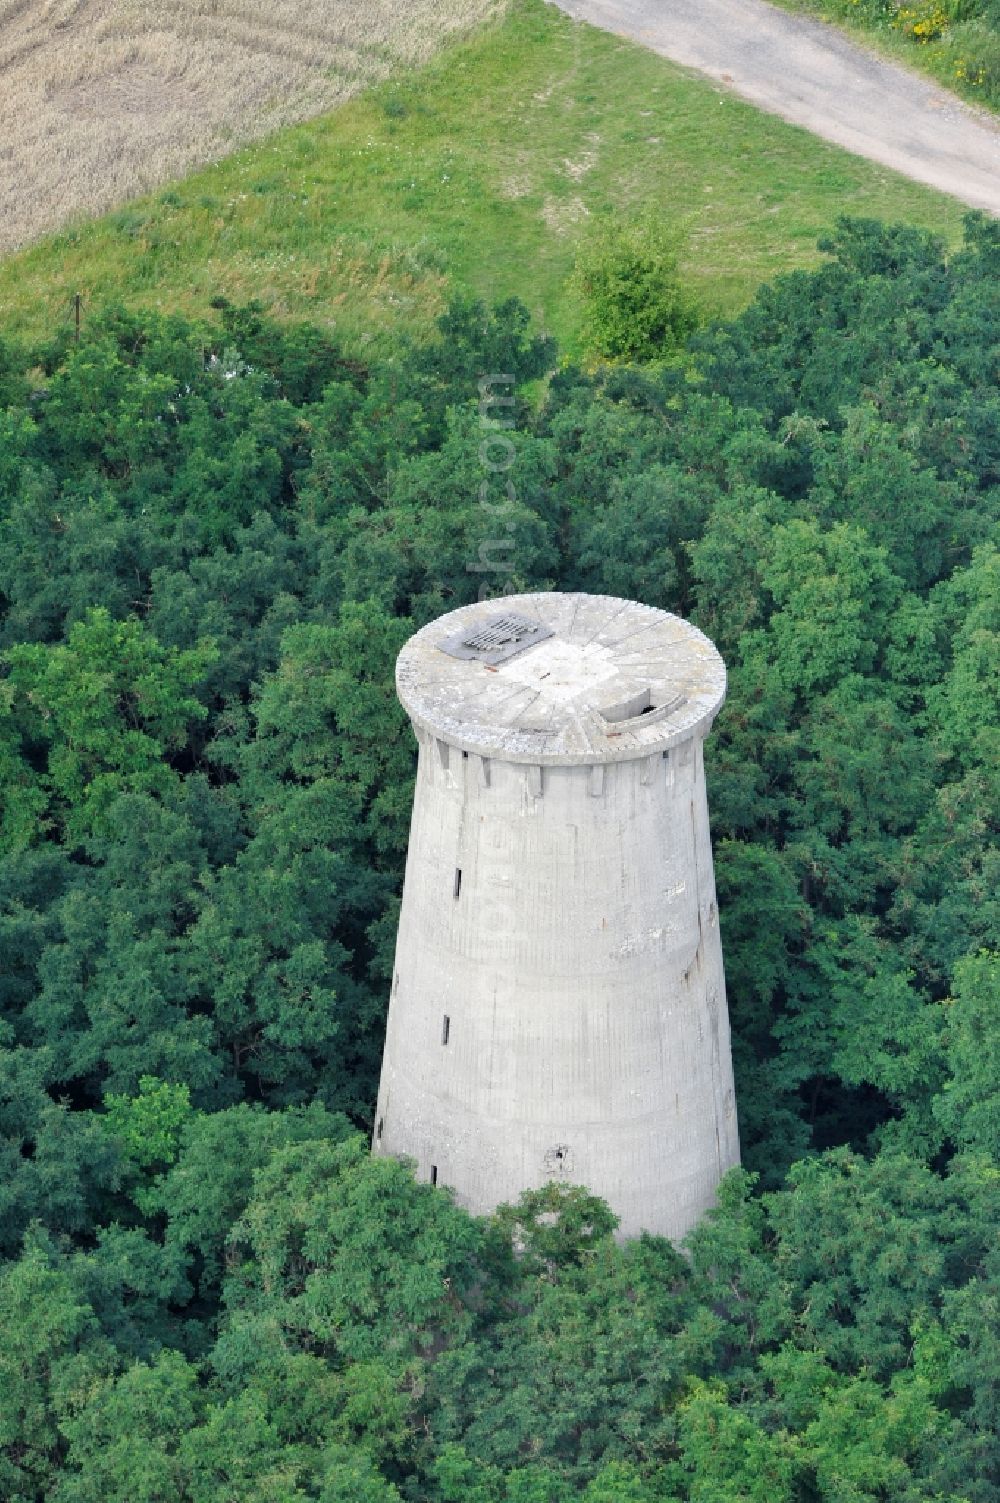 Weesow from above - Reconstruction of the concrete tower of the formally militarily used property Radarturm Weesow in Weesow in the state of Brandenburg, Germany